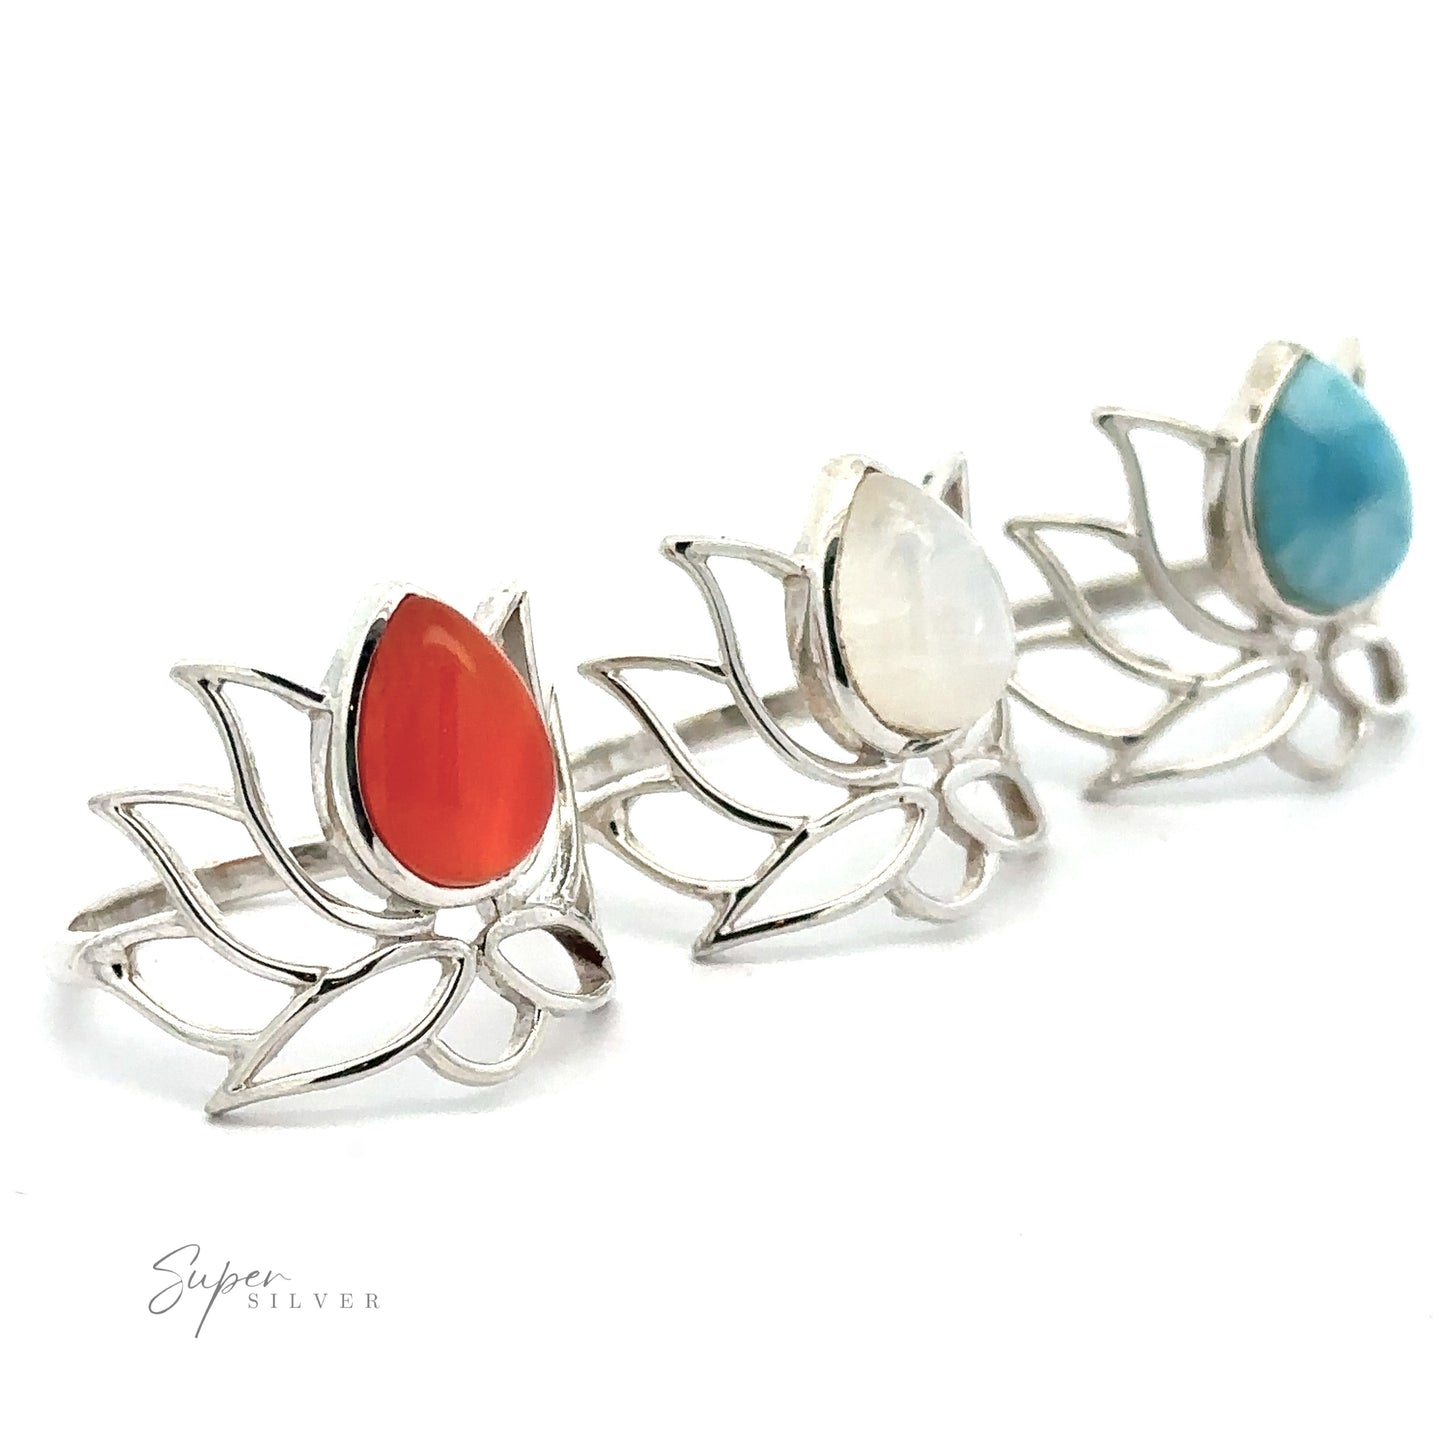 Three Online Exclusive Teardrop Stone Lotus Rings, each with a different colored teardrop gemstone—red, white, and blue—in a row on a white background.